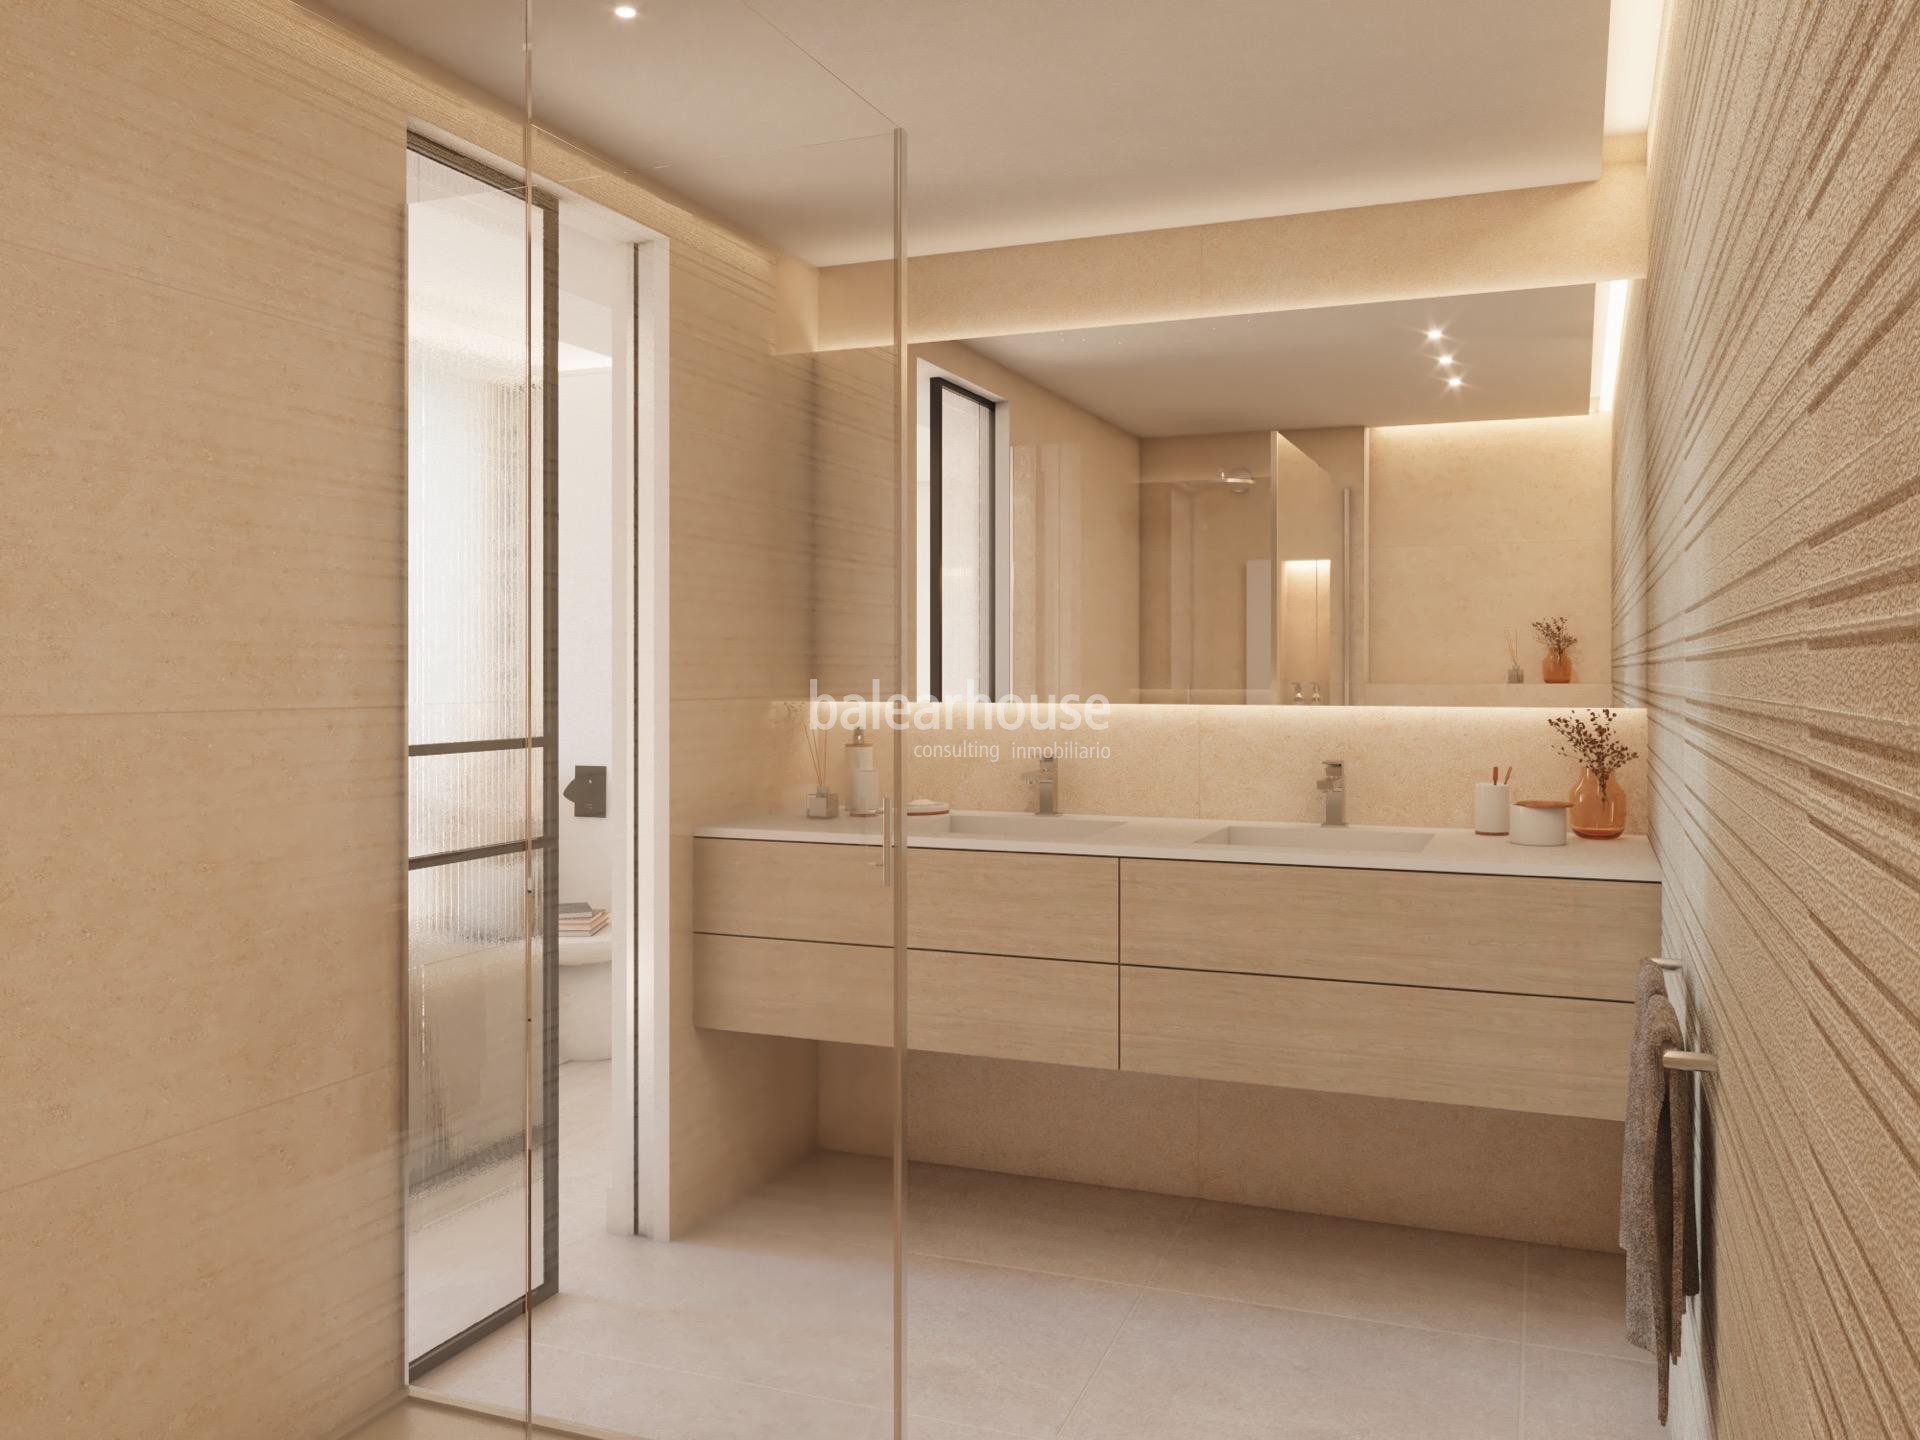 Fantastic penthouse project with the best of current design in a protected building in Palma